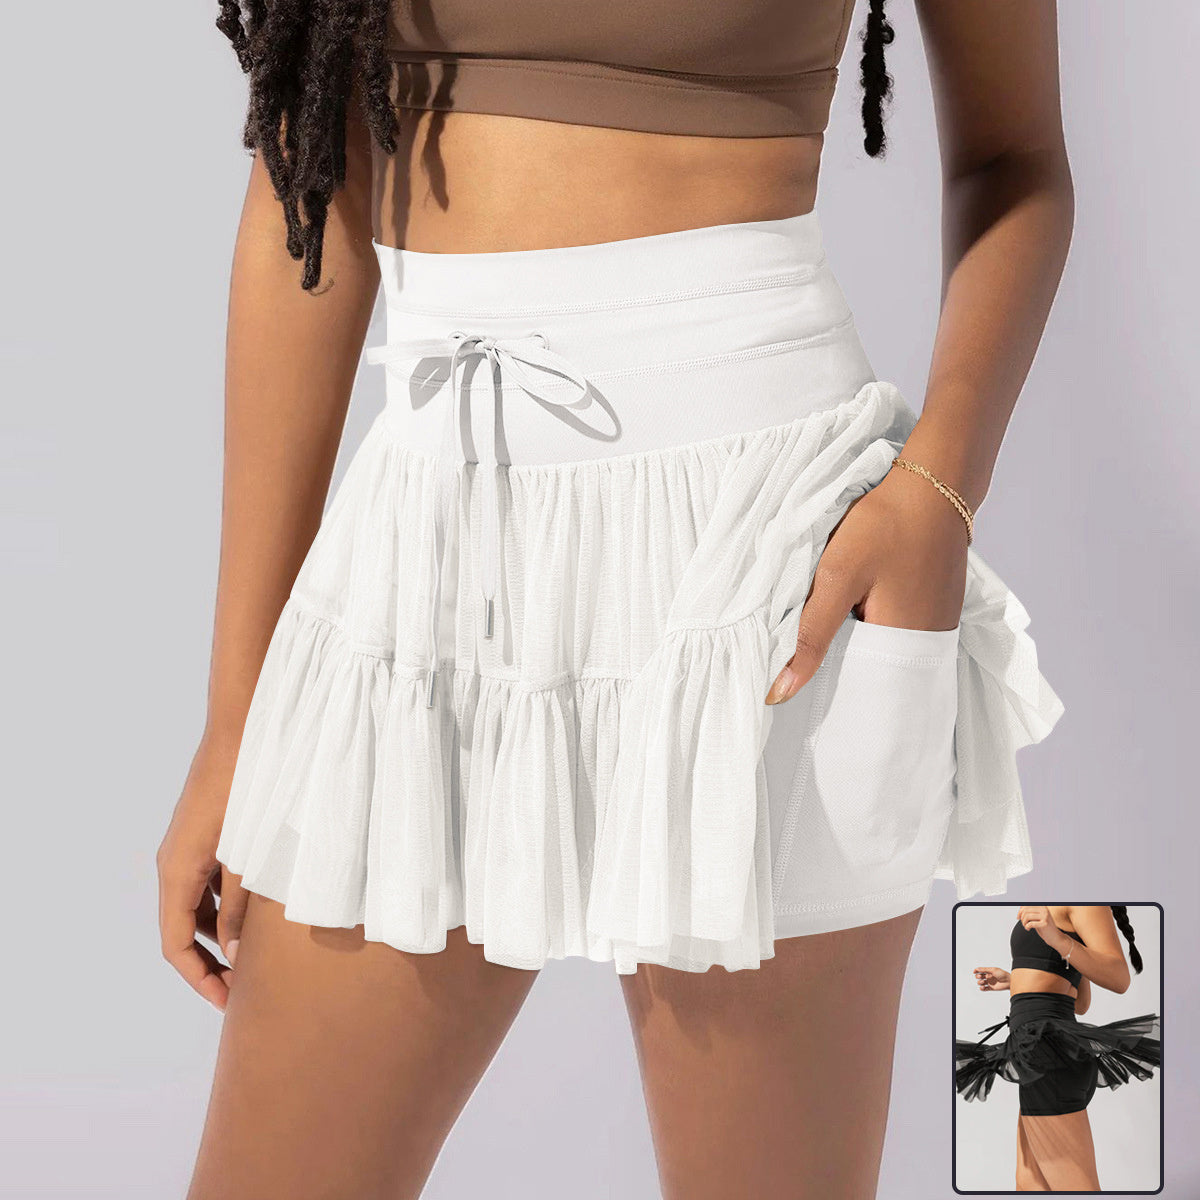 High Waist Dress Lace-up Sports Skirt With Anti-exposure Safety Pants Summer Fashion Pleated Skirt Womens Clothing